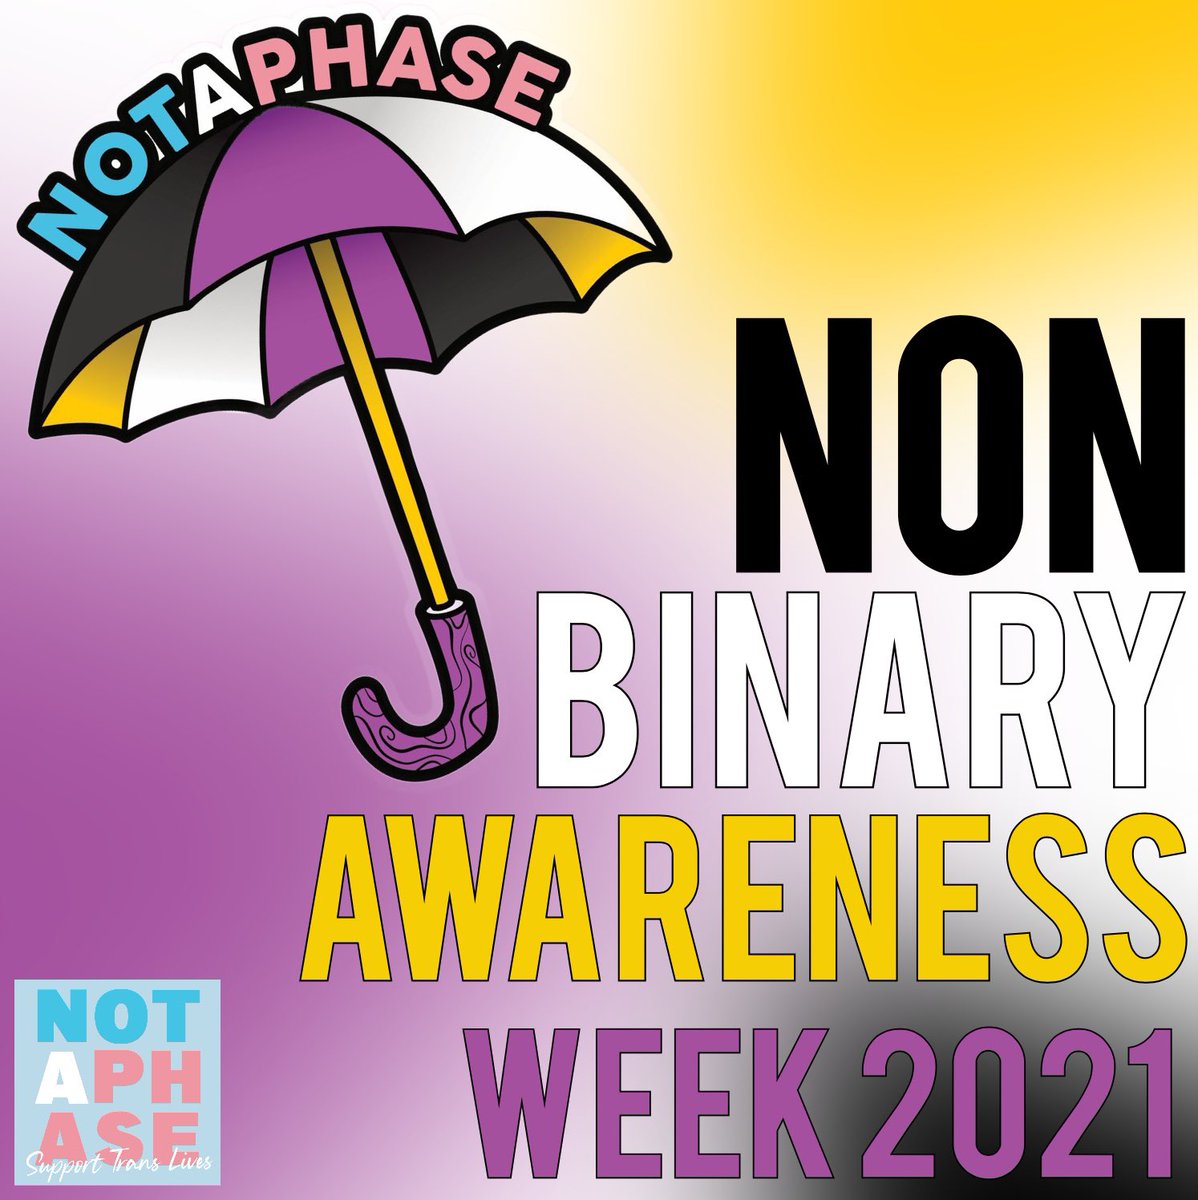 Non binary awareness week is a week dedicated to those who do not fit within the traditional gender binary or put simply, those who do not exclusively identify as a man or a woman, or who may identify as both a man and a woman or may fall outside of these categories altogether.